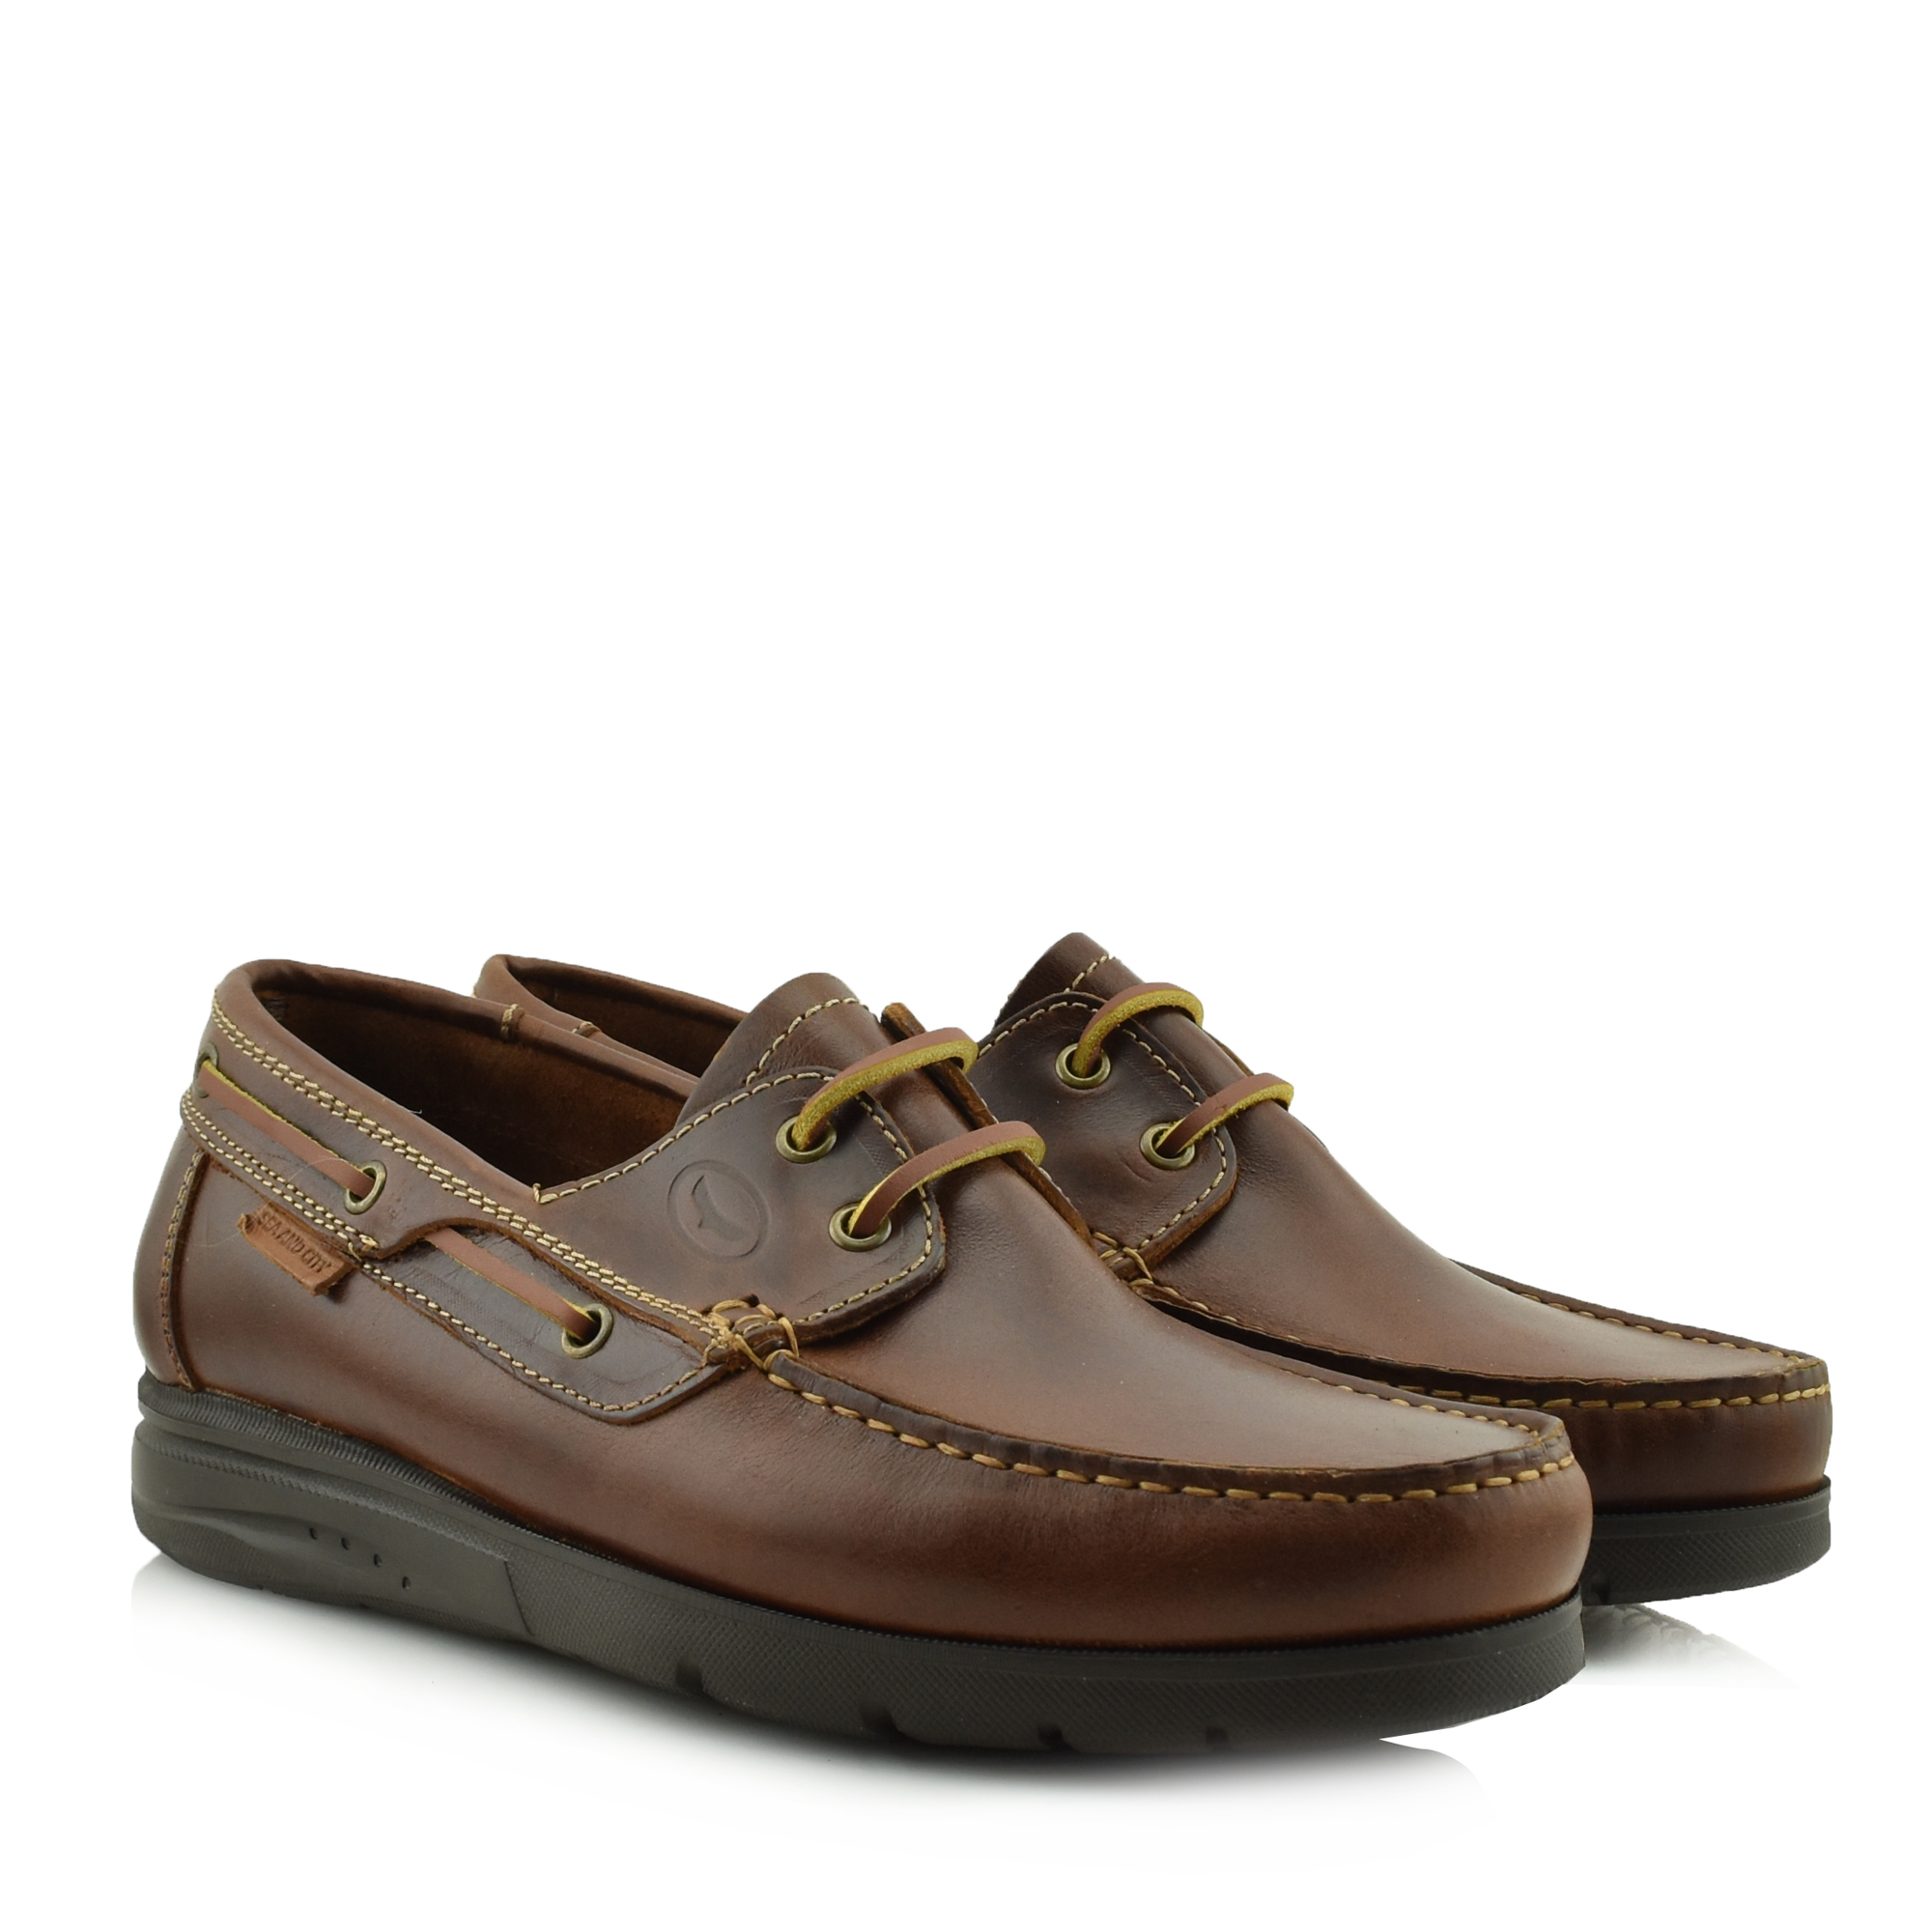 SEA AND CITY BRANDY LEATHER - 41109